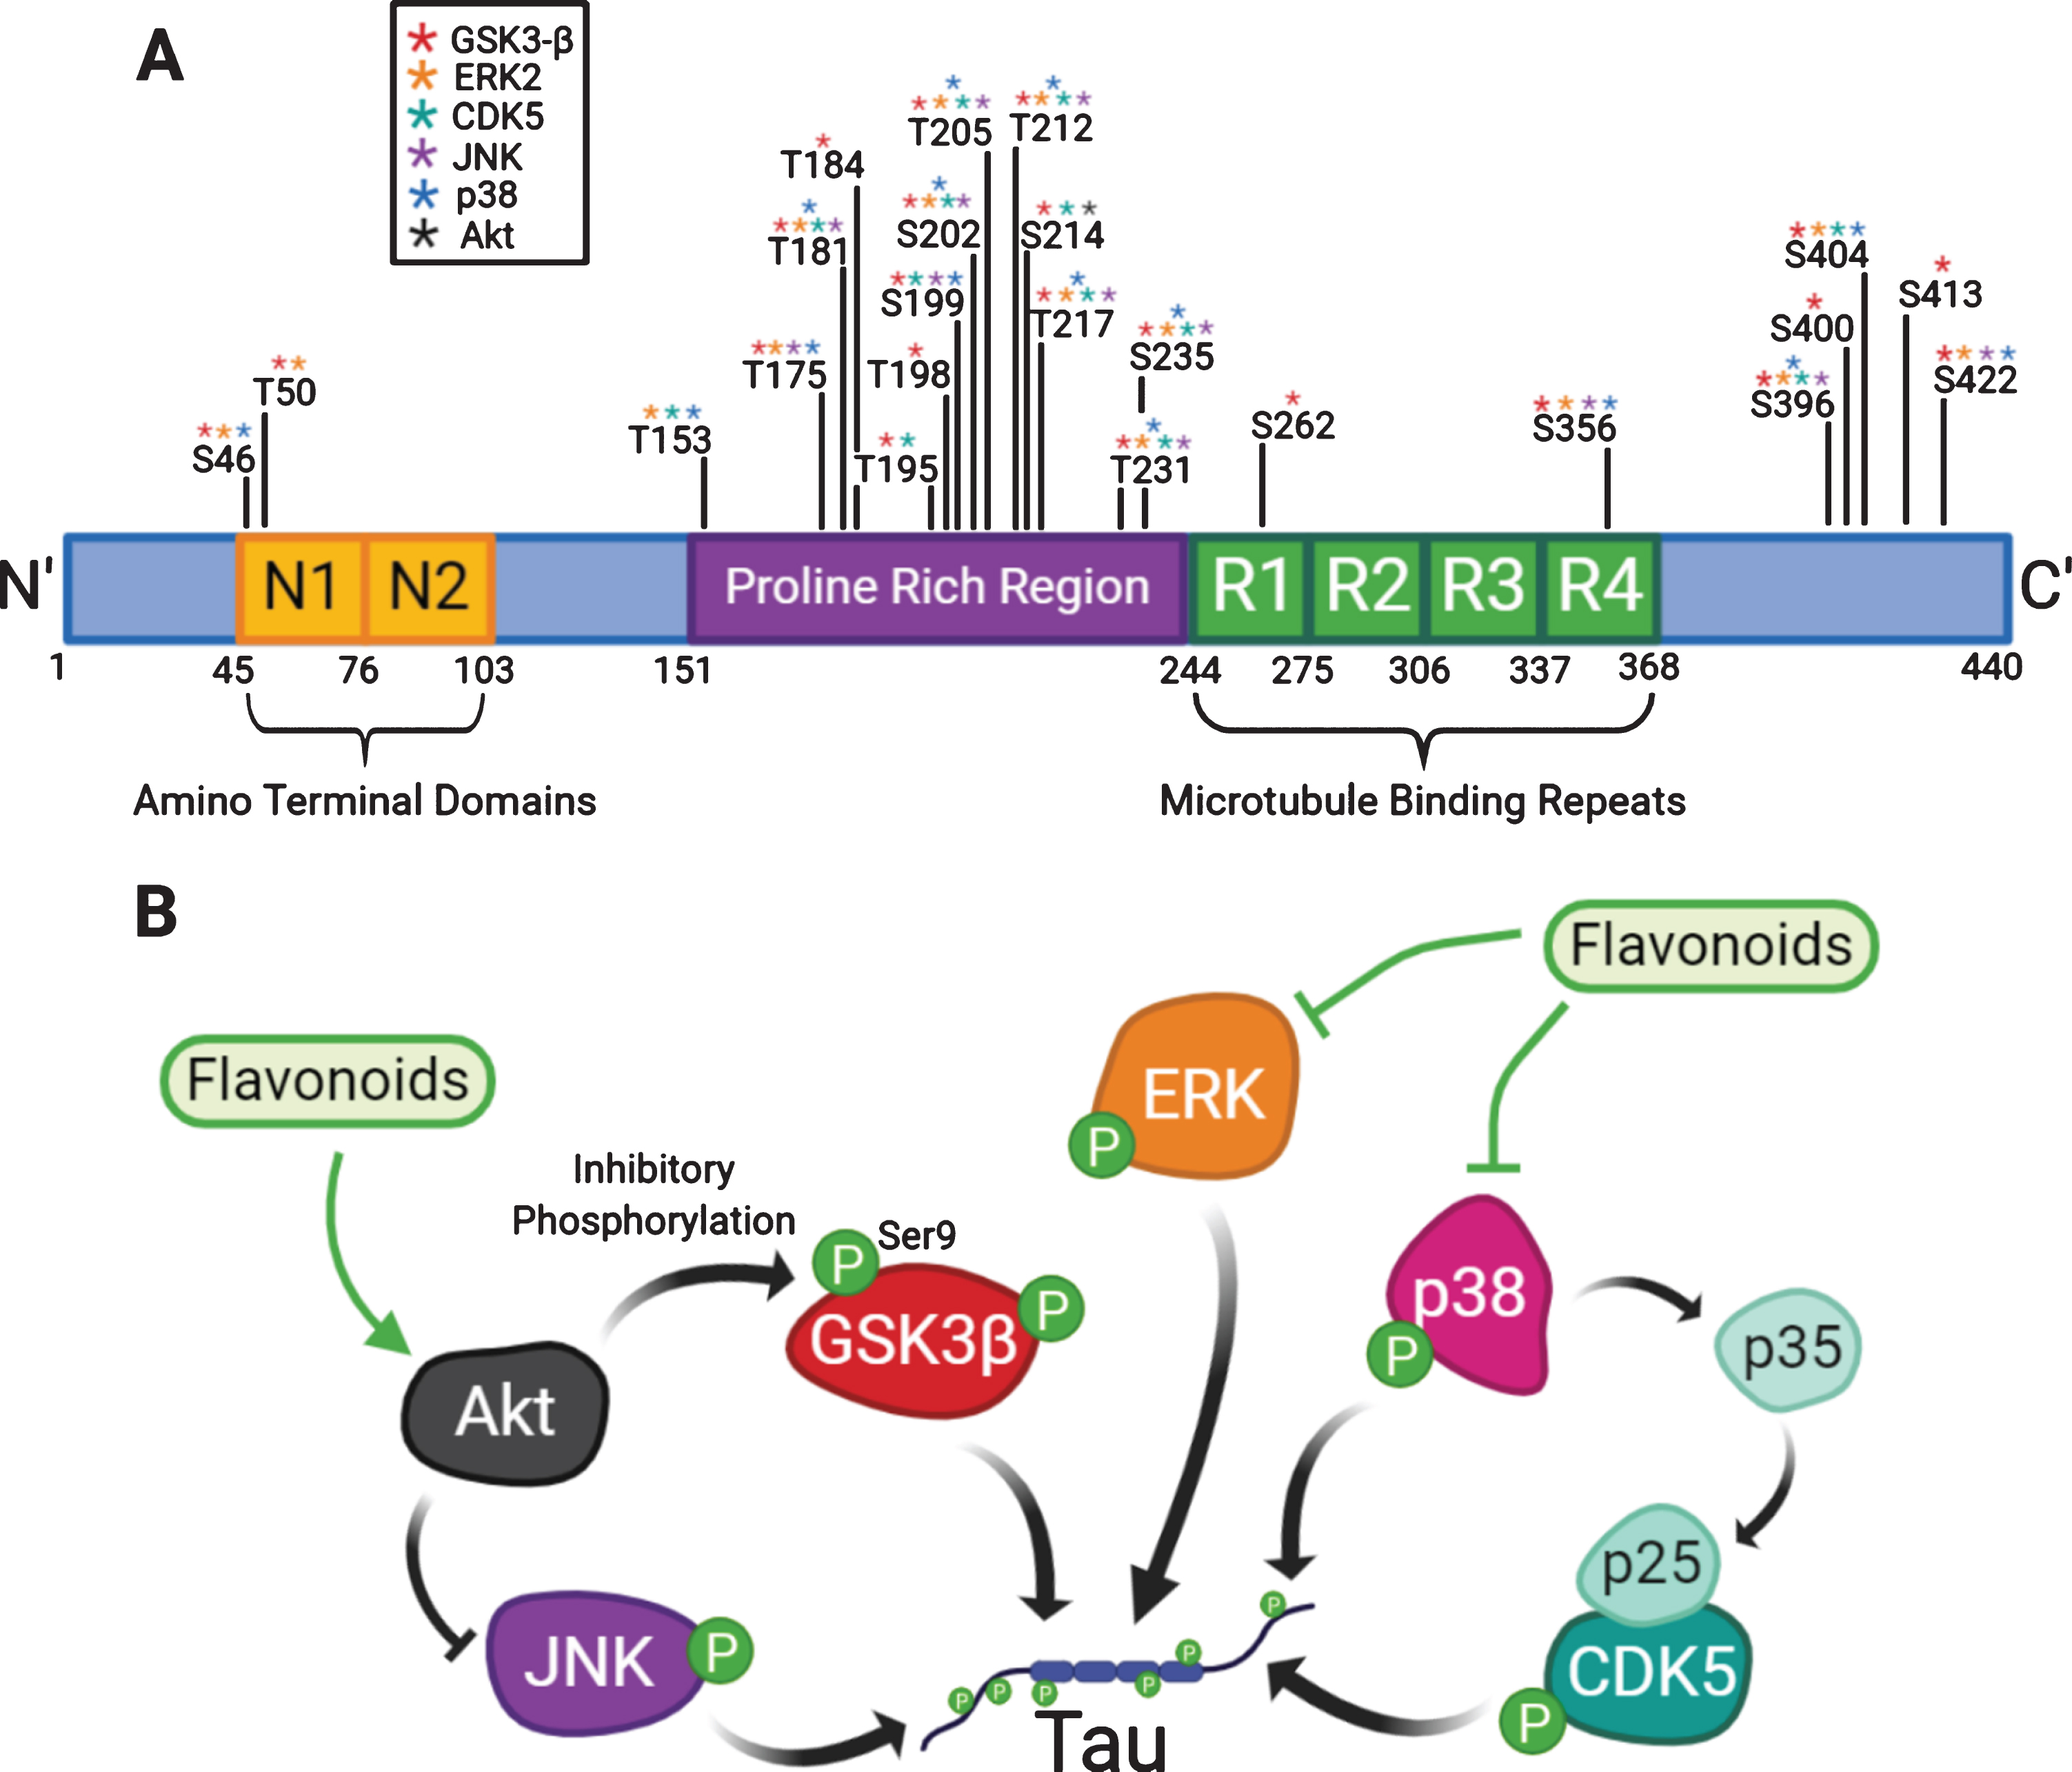 Flavonoids can modulate kinases involved in the hyperphosphorylation of tau. (A) Tau contains an amino-terminal domain, a proline rich region and microtubule binding repeats (R1–R4). The diagram highlights the identified phosphorylation sites on tau which have been shown to be phosphorylated by kinases that can be modulated by flavonoids: GSK3β, ERK2, CDK5, JNK, p38 and Akt [98–109]. (B) A diagram explaining how flavonoids may attenuate tau phosphorylation by modulation of kinases.